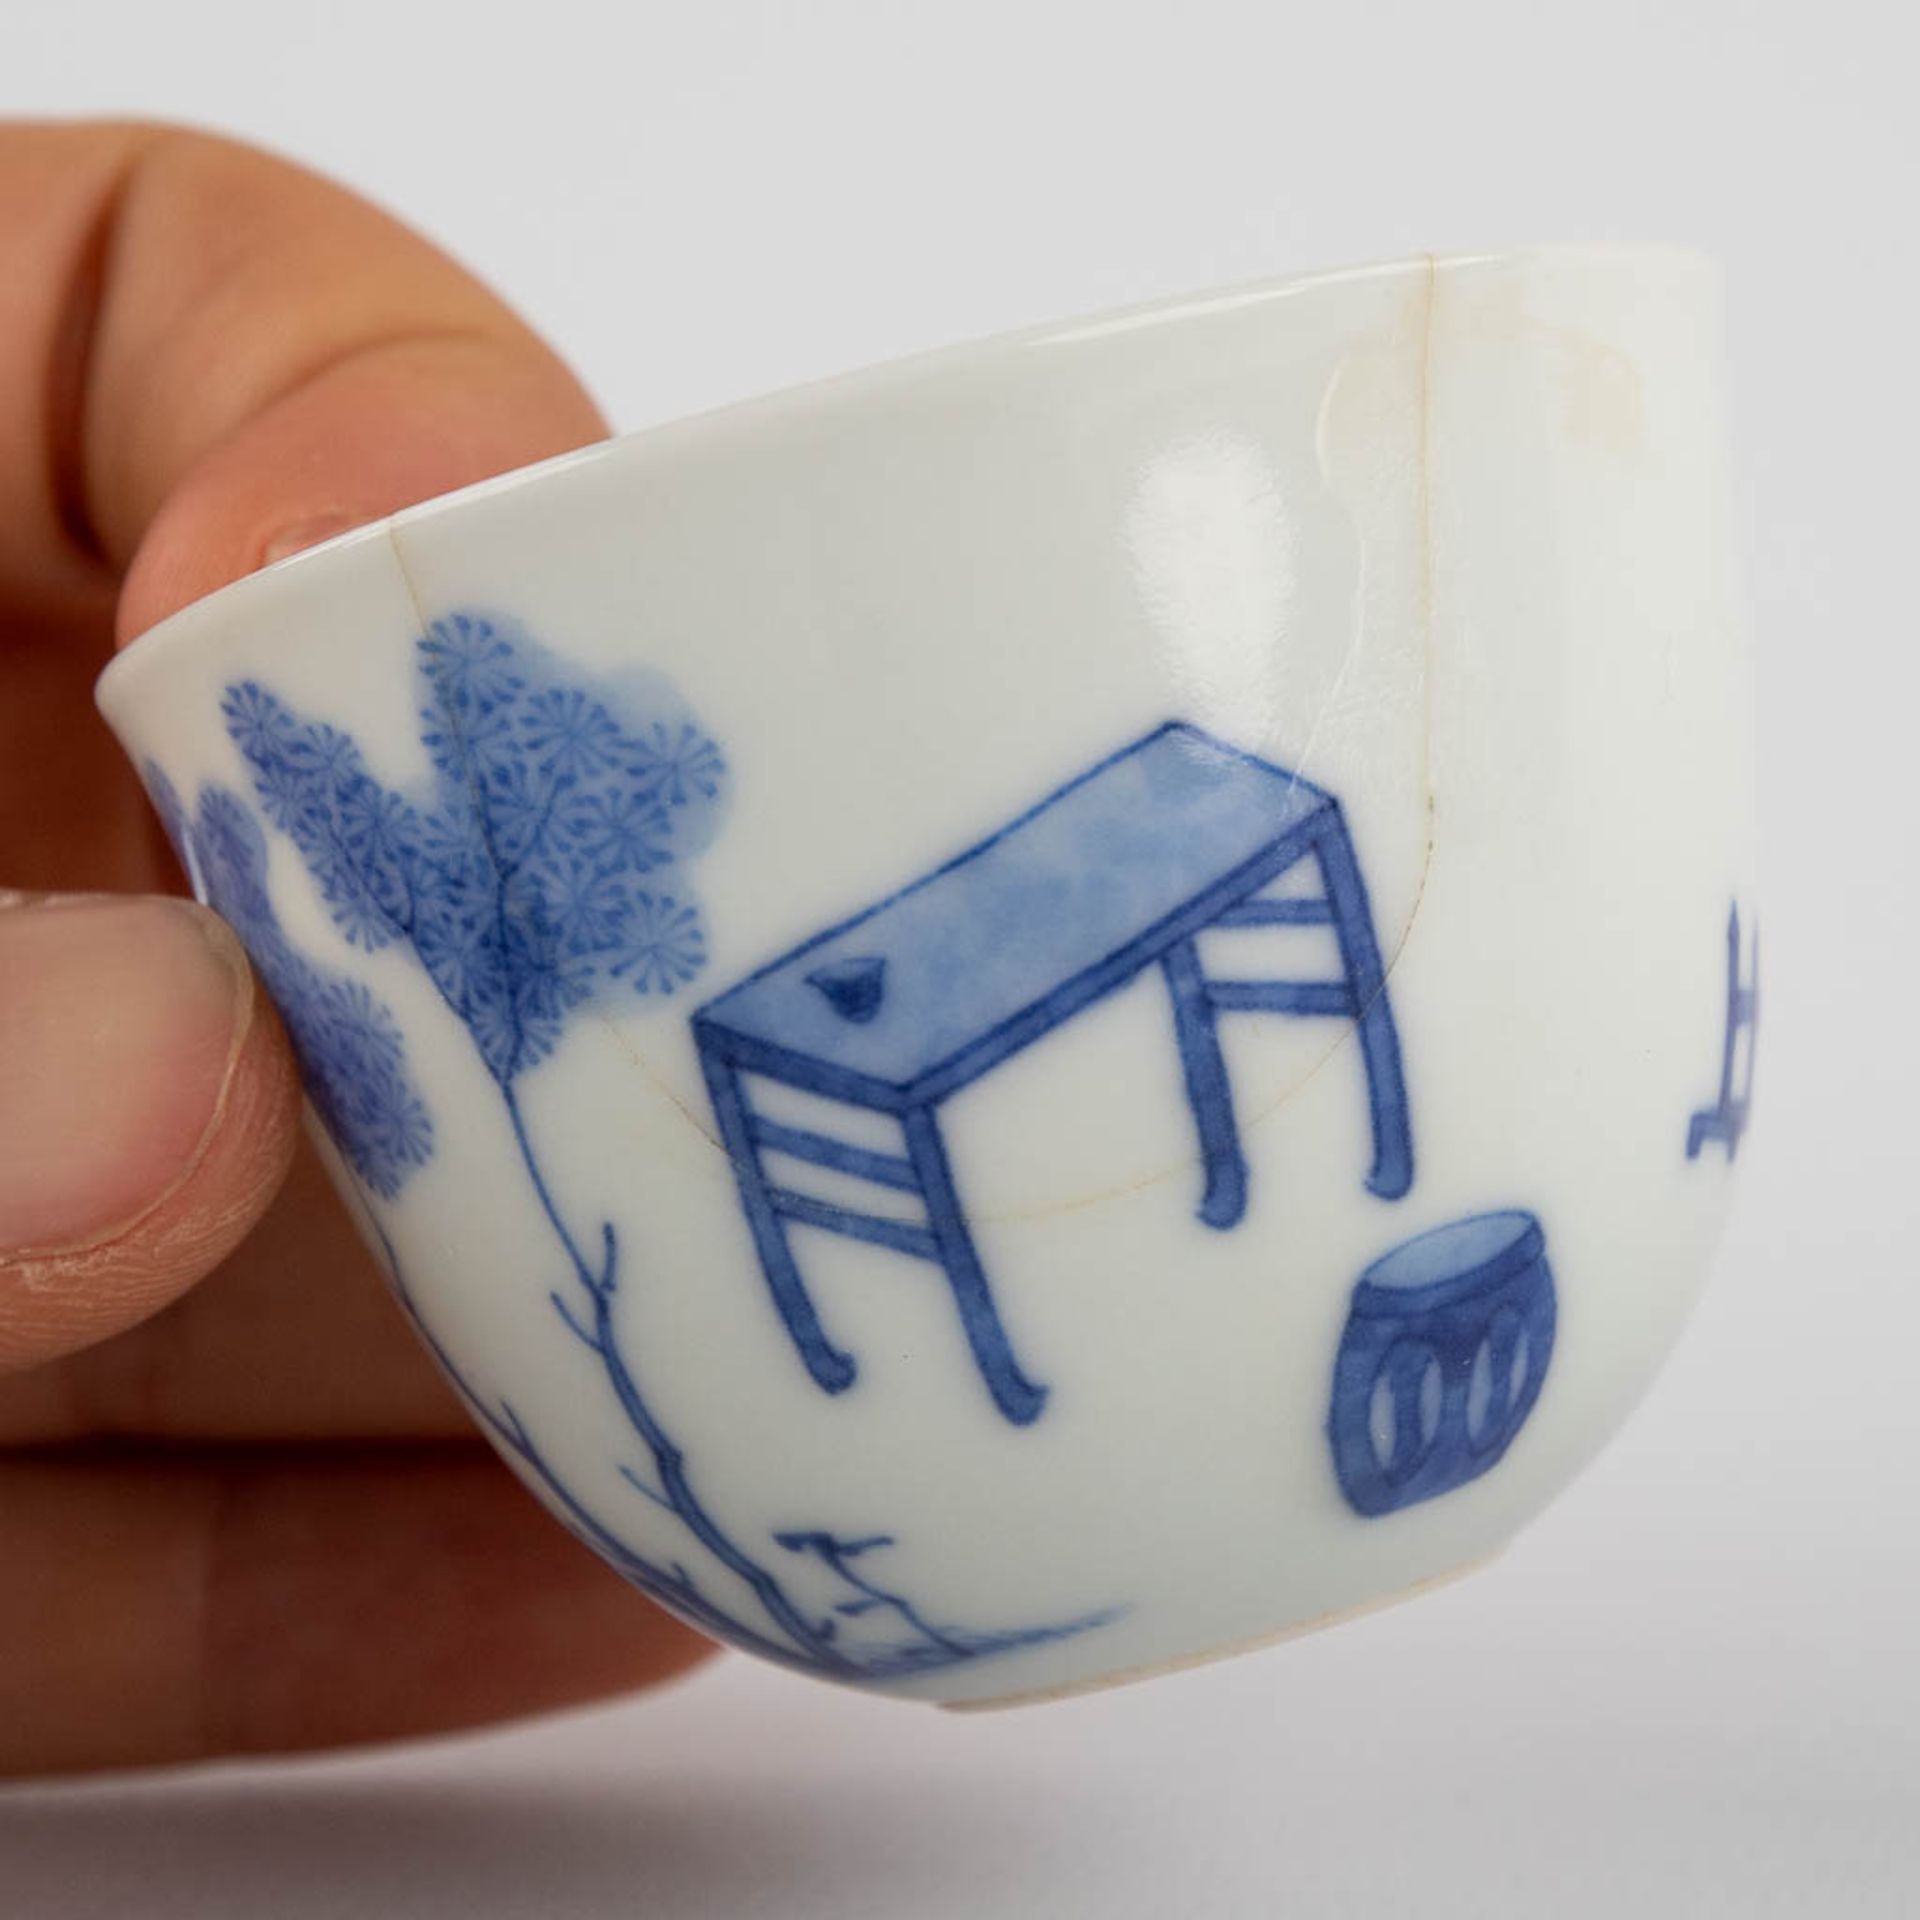 A small Chinese teacup with blue-white erotic scène, Chenghua mark, 19th/20th C. (H:4,5 x D:6,2 cm) - Image 11 of 11